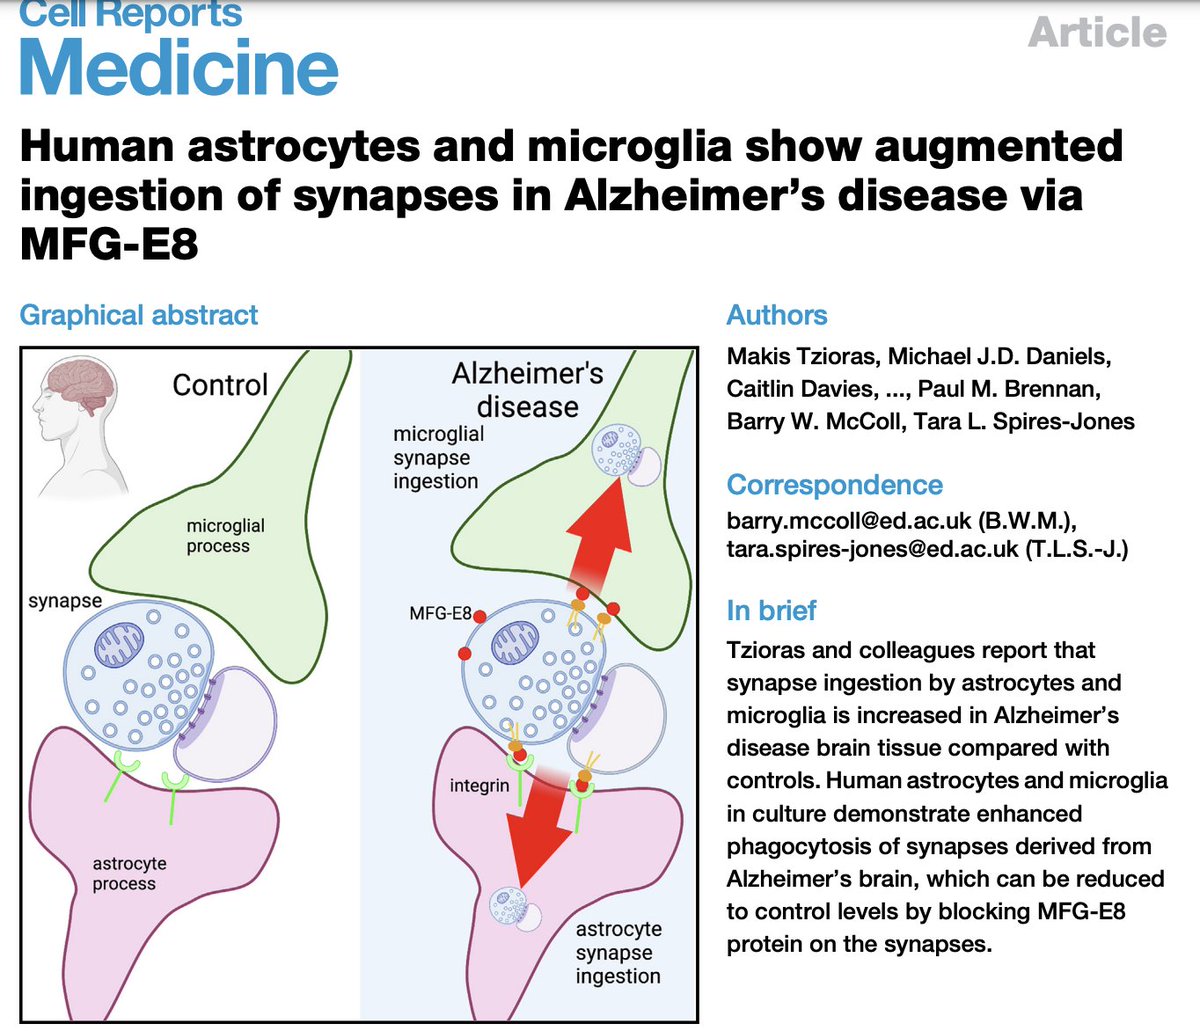 Look at this beauty! A paper many years in the making with several rounds of very difficult review. Amazing work from the whole team and collaborating labs @EdNiBL @mike_jd_daniels cell.com/cell-reports-m…